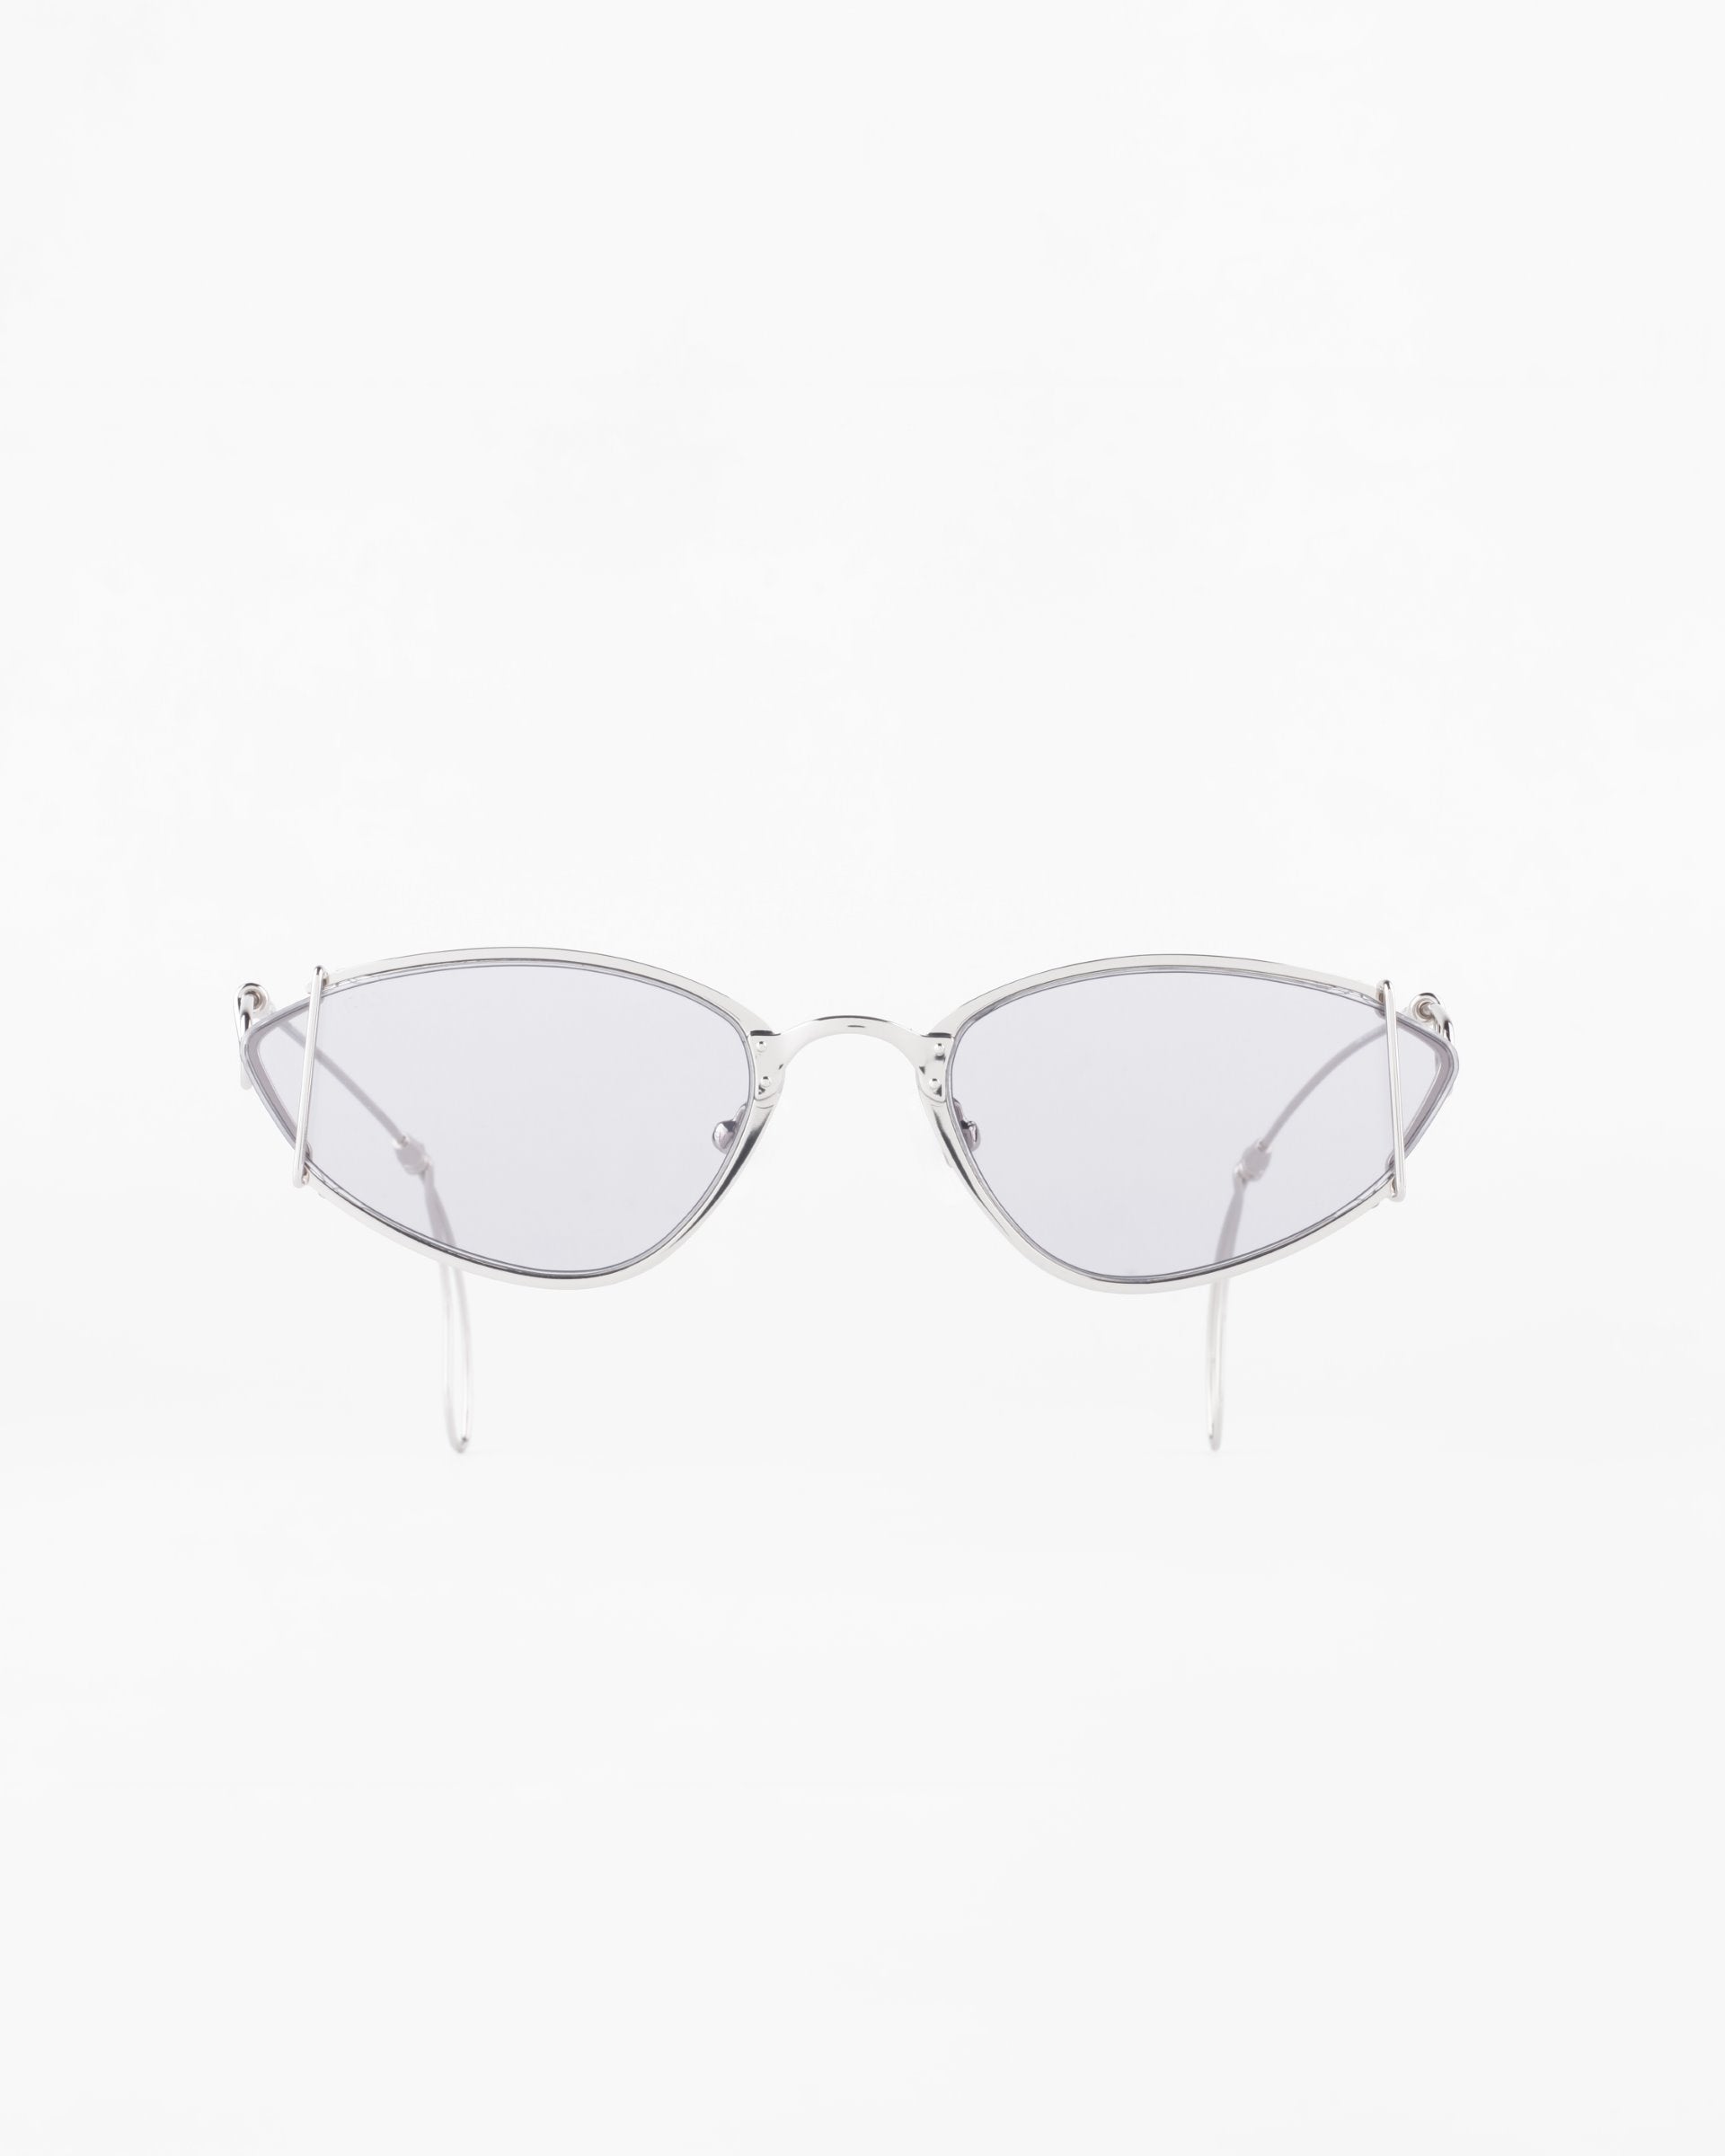 A pair of stylish sunglasses with thin, gold-plated stainless steel frames and slightly tinted, elongated oval lenses against a white background. The glasses have a modern and minimalist design with delicate temples that offer 100% UVA & UVB protection. These are the Ornate by For Art's Sake®.